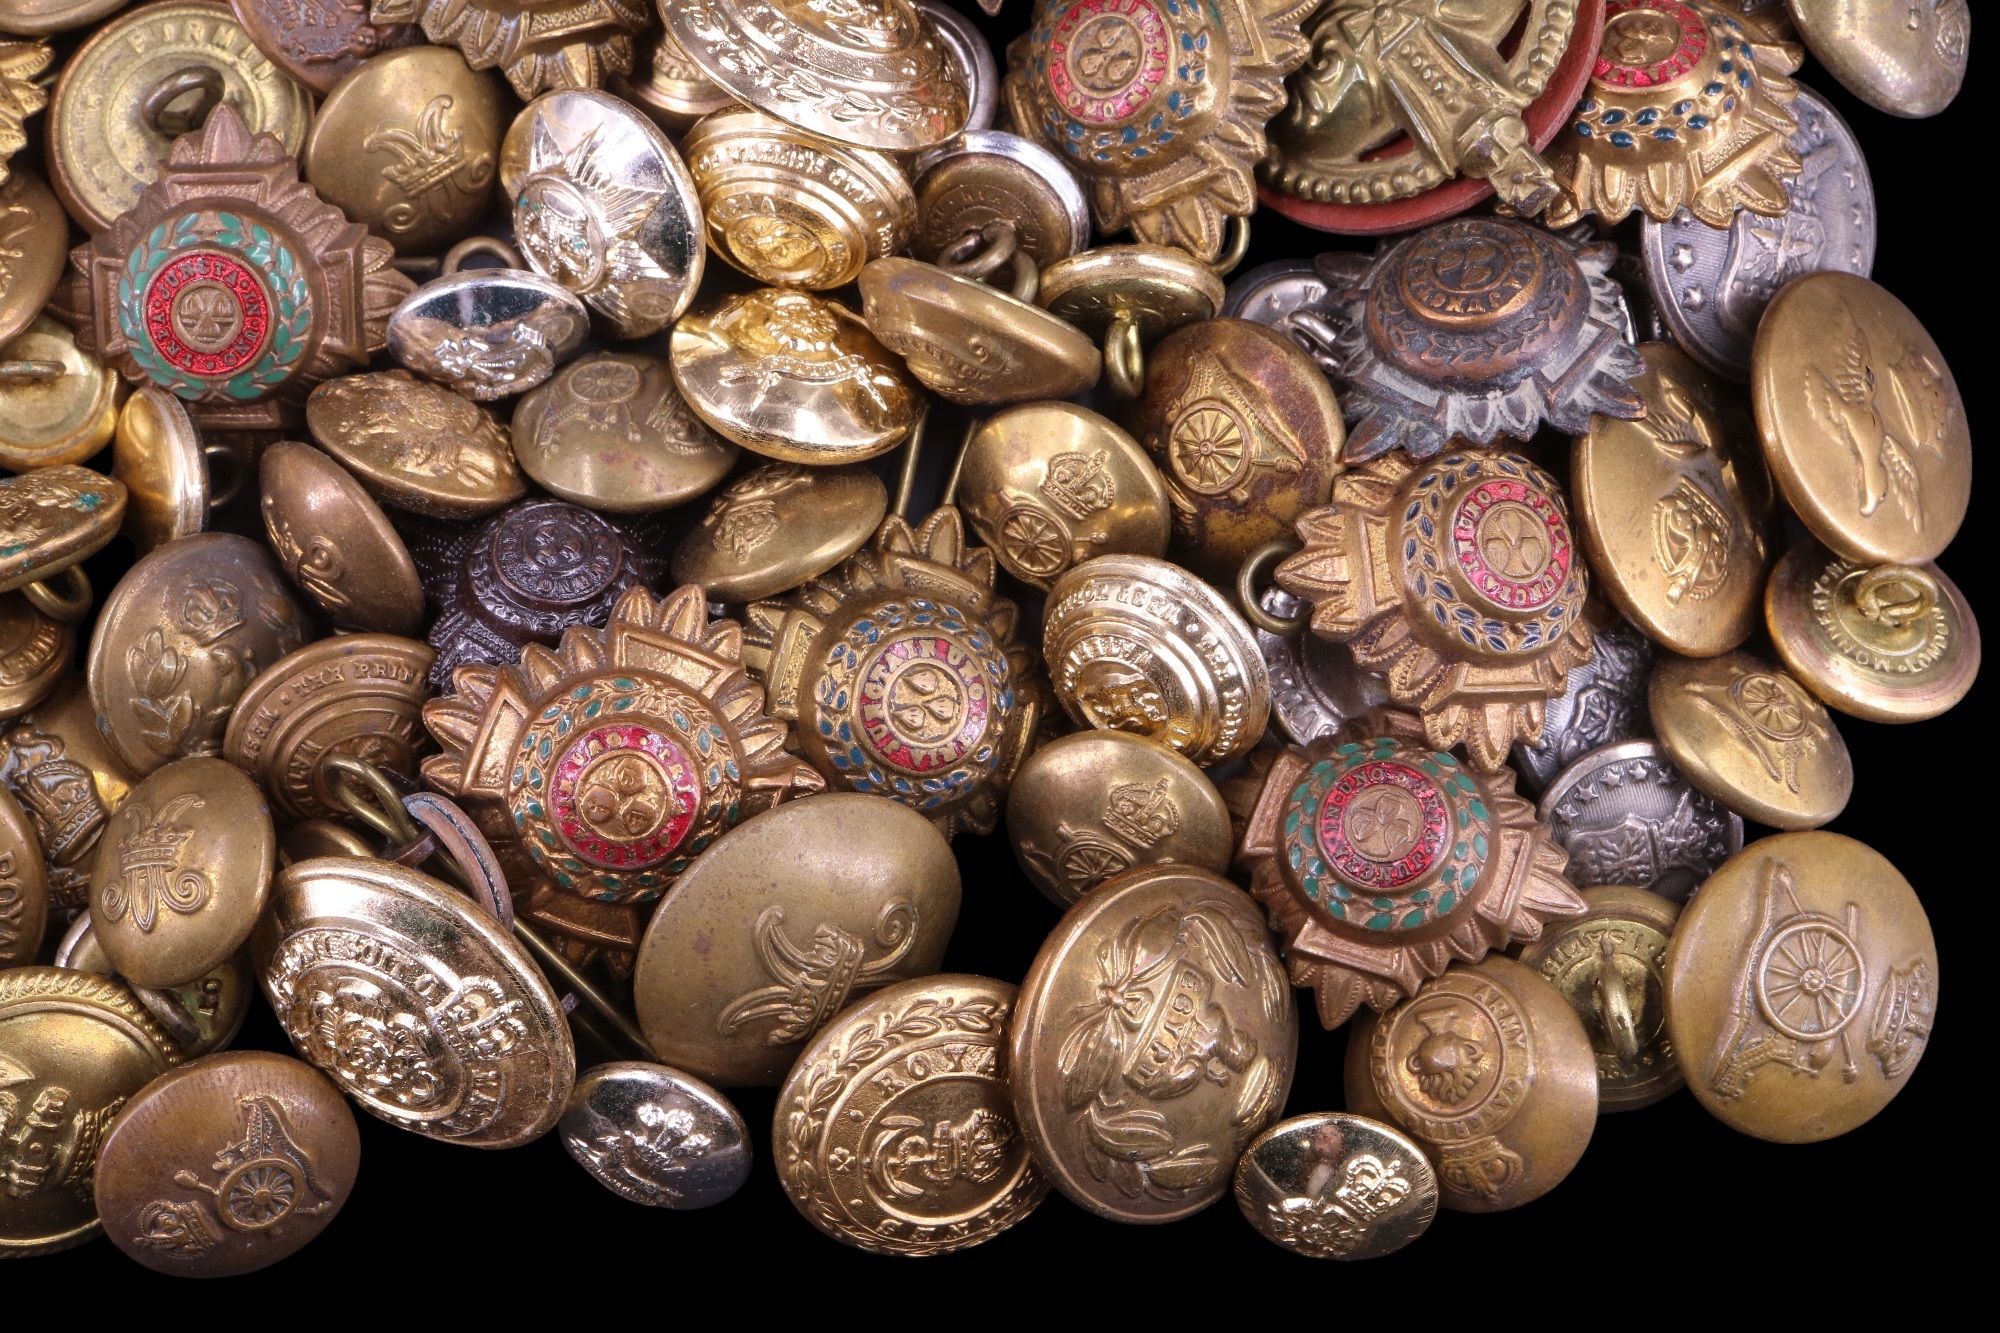 A quantity of British army buttons and rank badges etc - Image 5 of 7